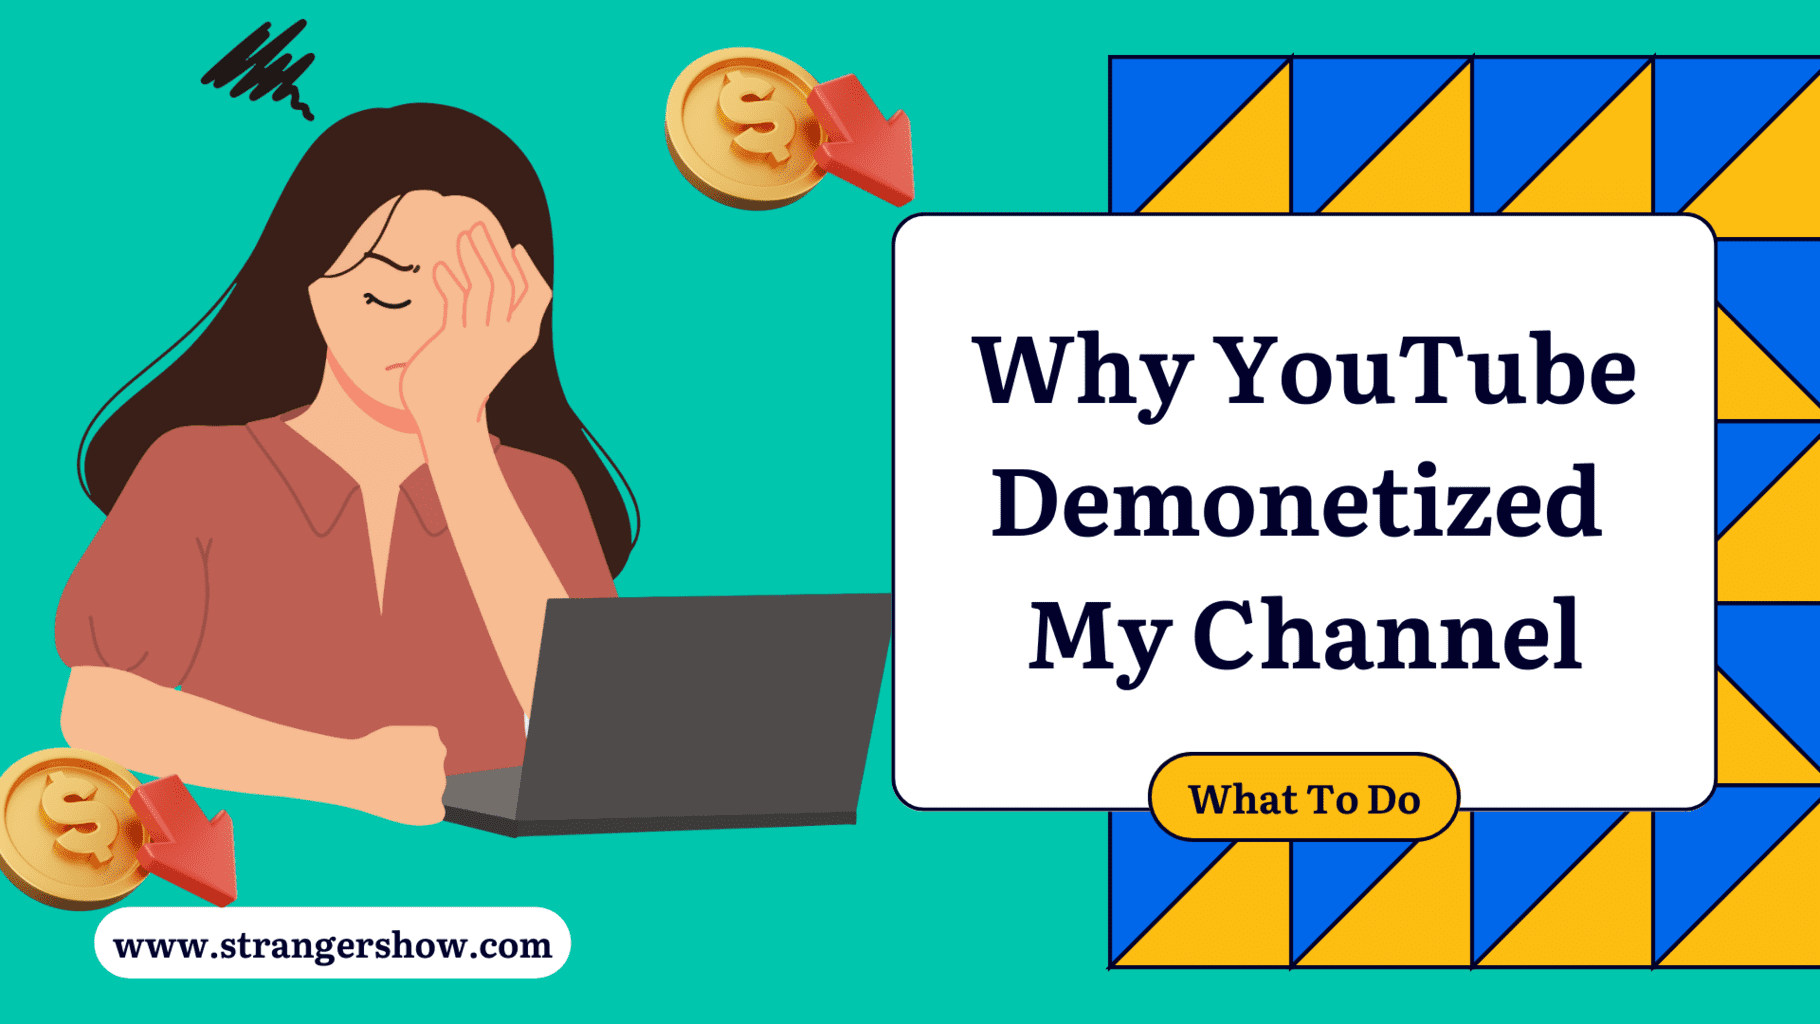 Why YouTube Demonetized Channel